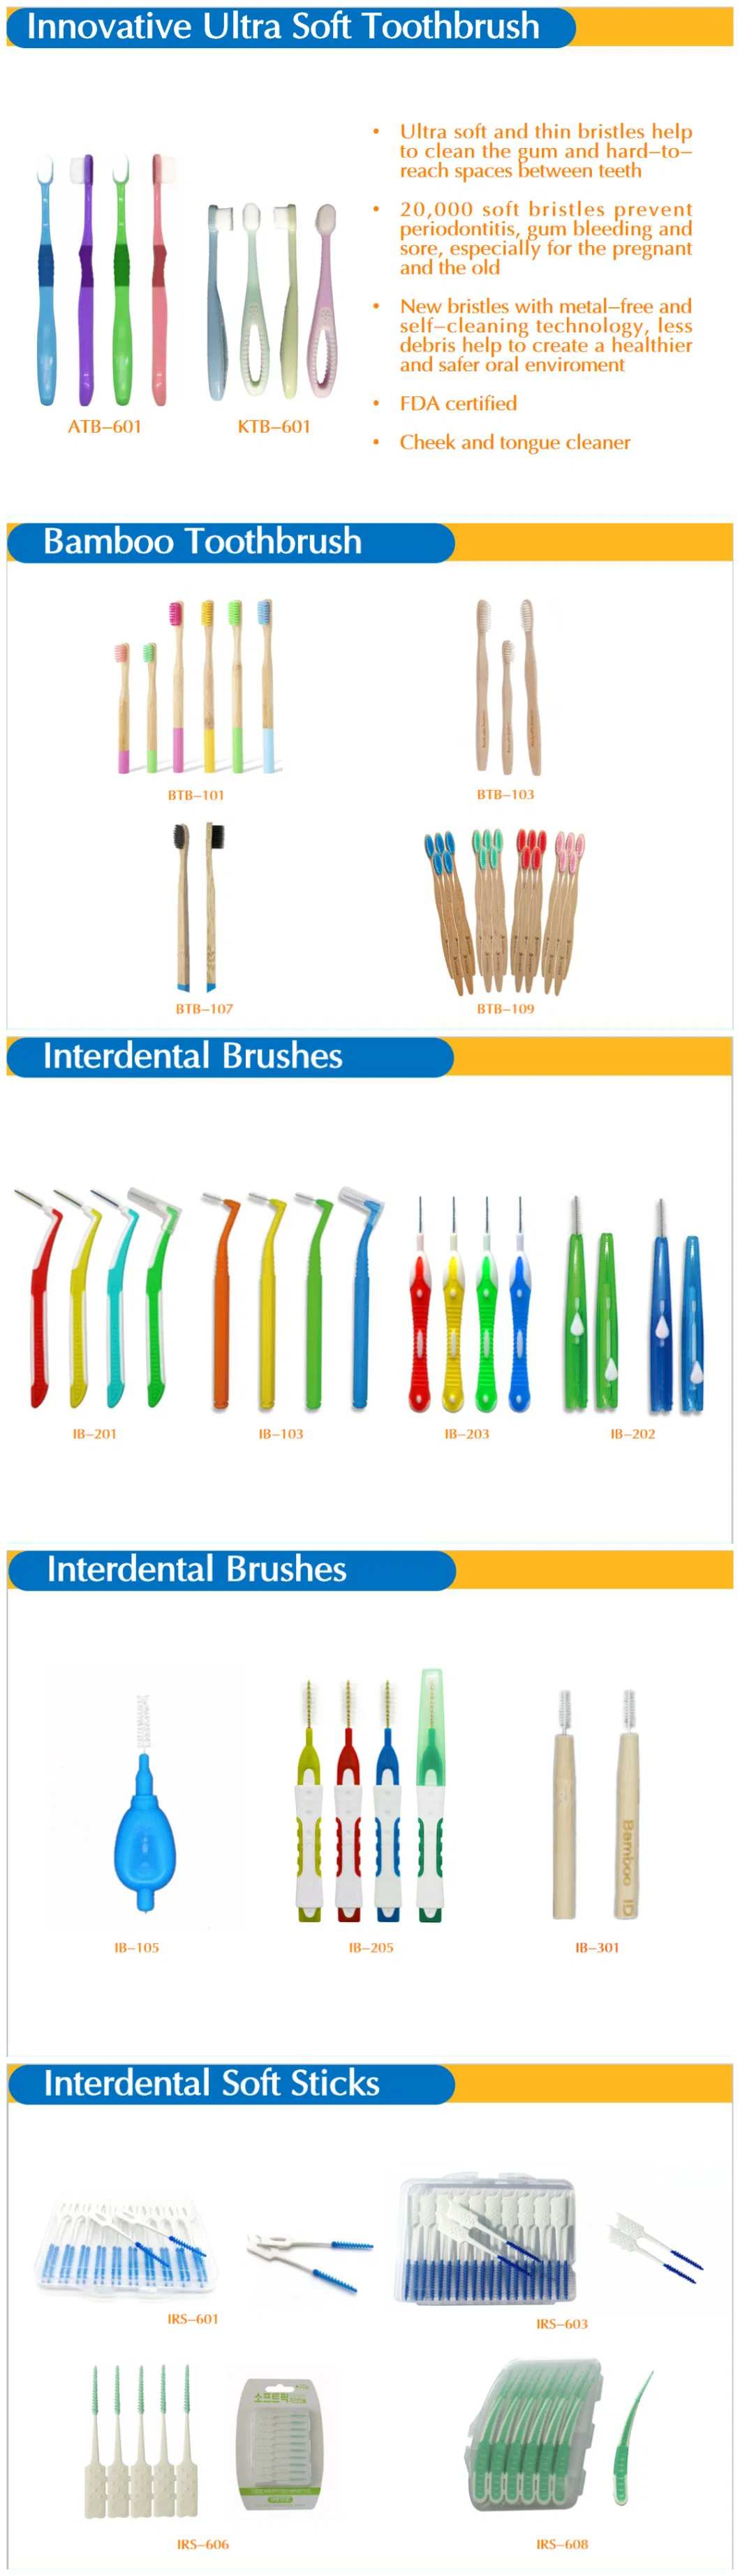 OEM Biodegradable Eco Friendly Organic Bamboo Toothbrush/Tooth Brush with Customized Package for Adult/Kid/Child